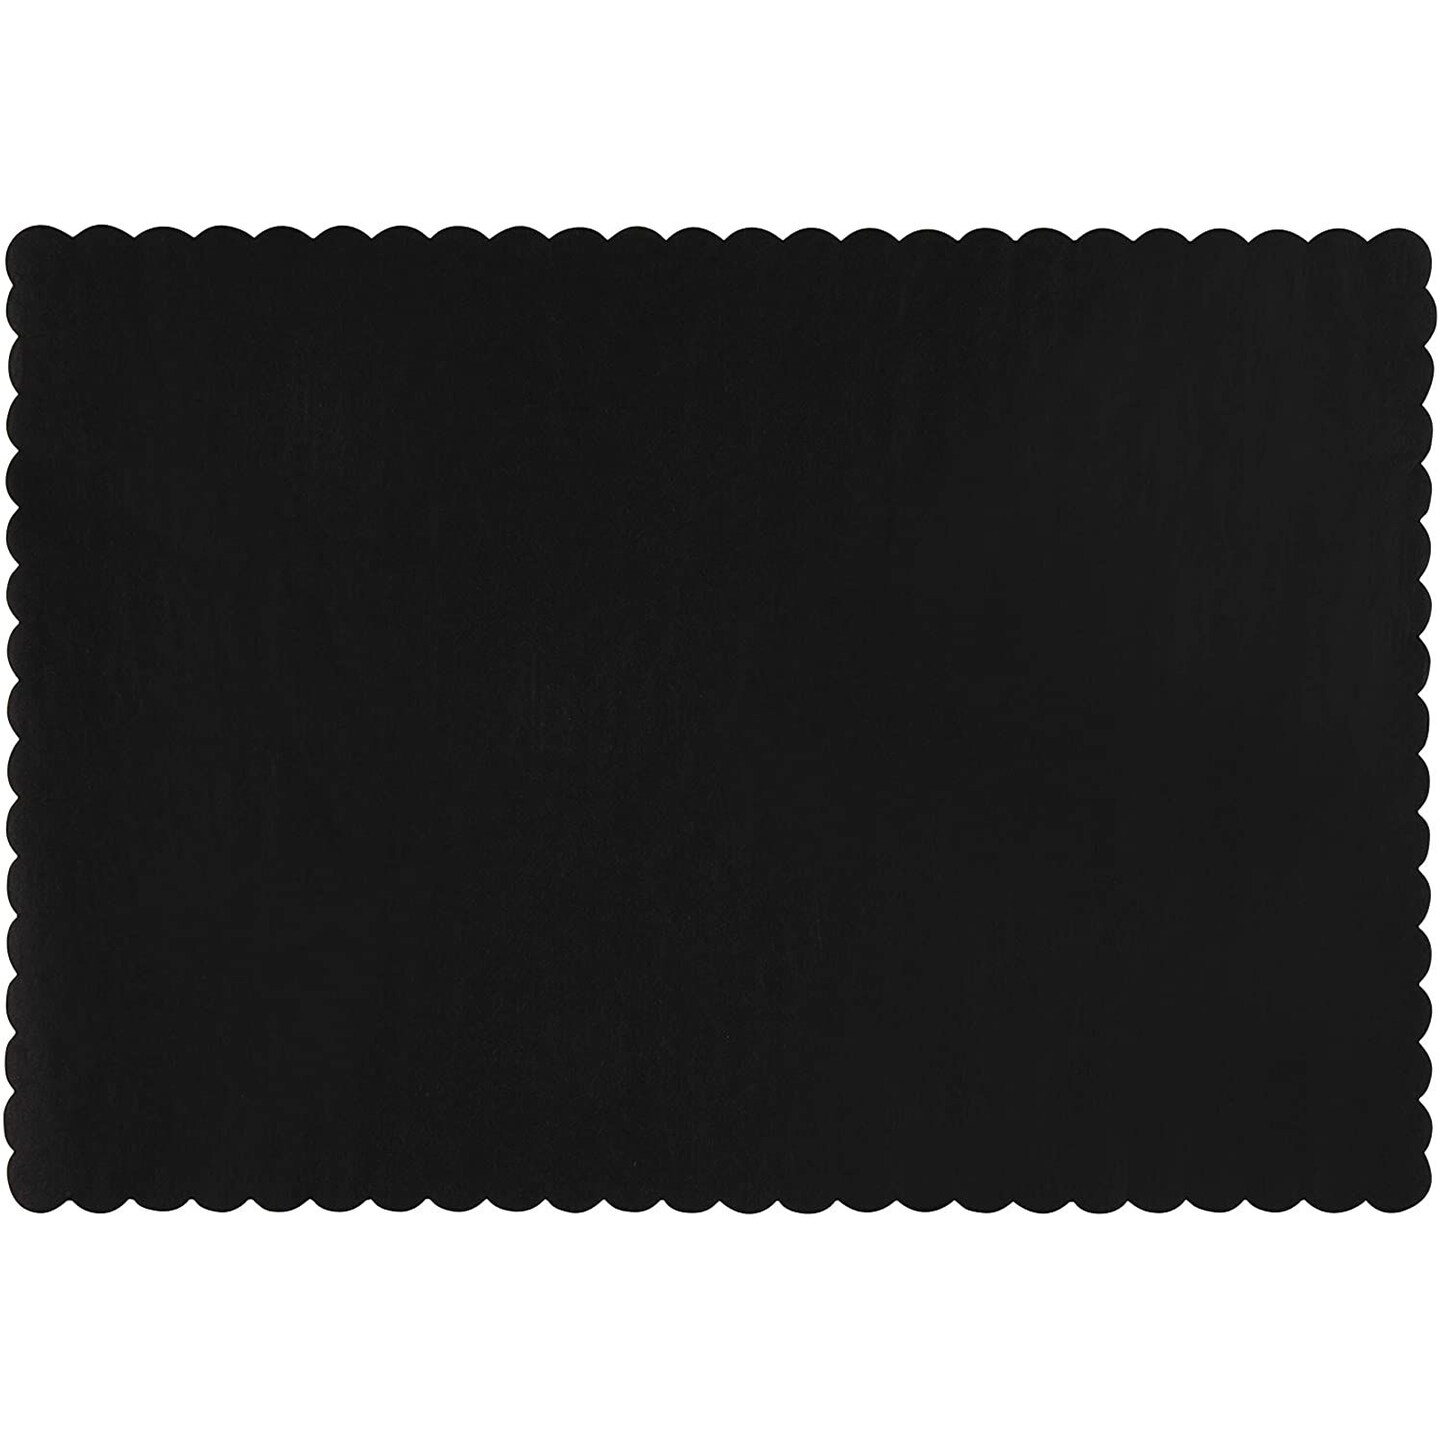 100-Pack Paper Placemats - Black Bulk Disposable Placemats, Colored Tabletop Mats with Wavy Scalloped Edge, Birthday Party Supplies, Graduation, Black Party Decoration, 14 x 10 Inches